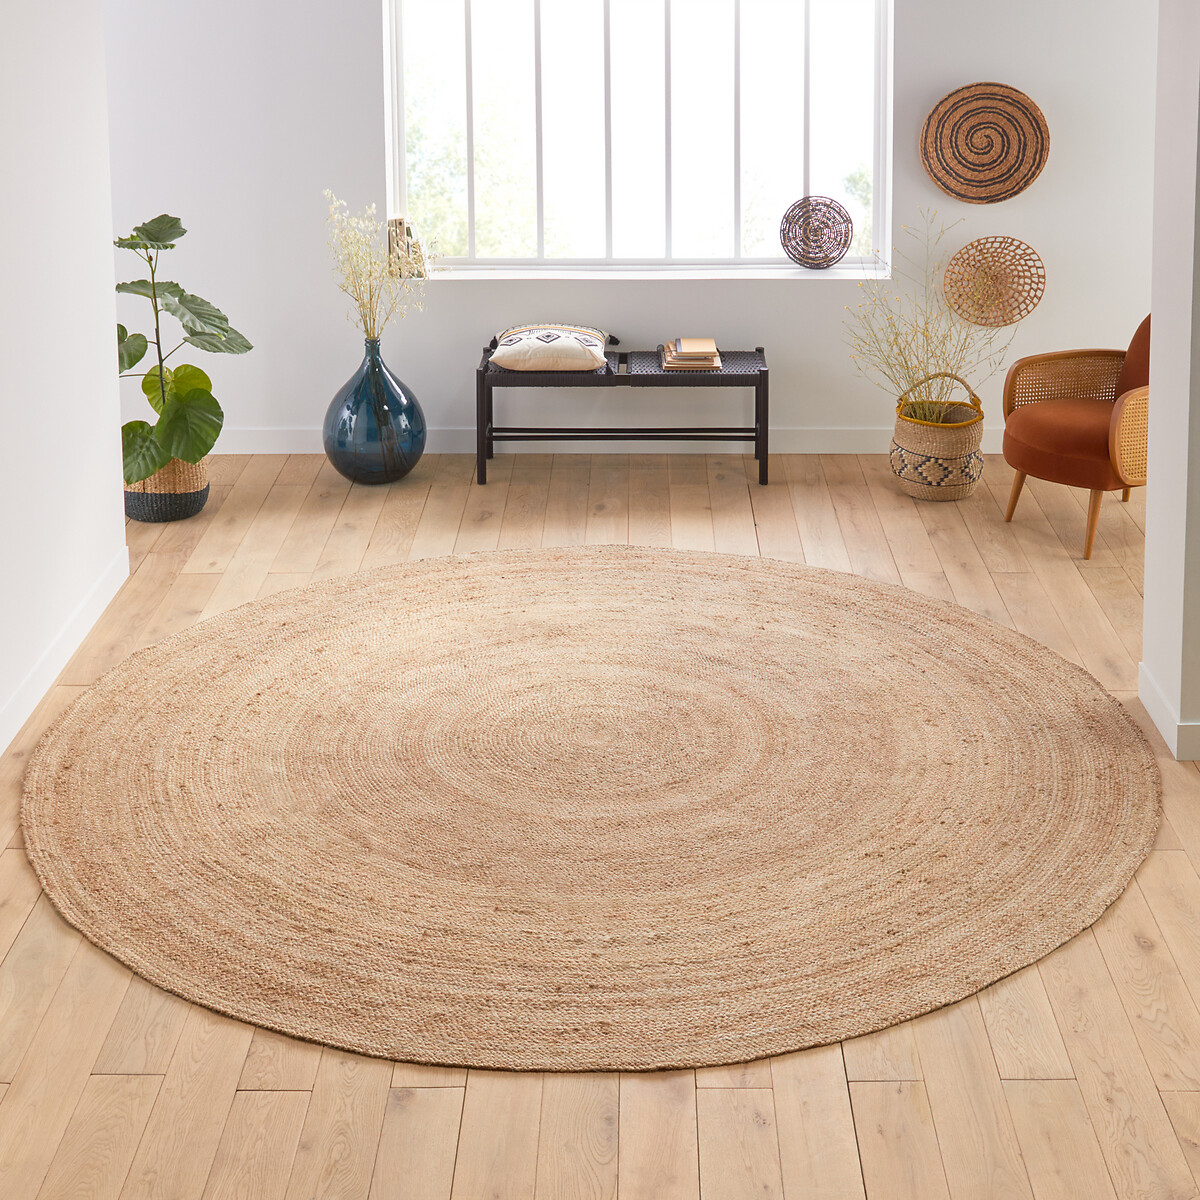 Aftas Round Jute Rug Natural Beige La, Are Jute Rugs Good For Cats